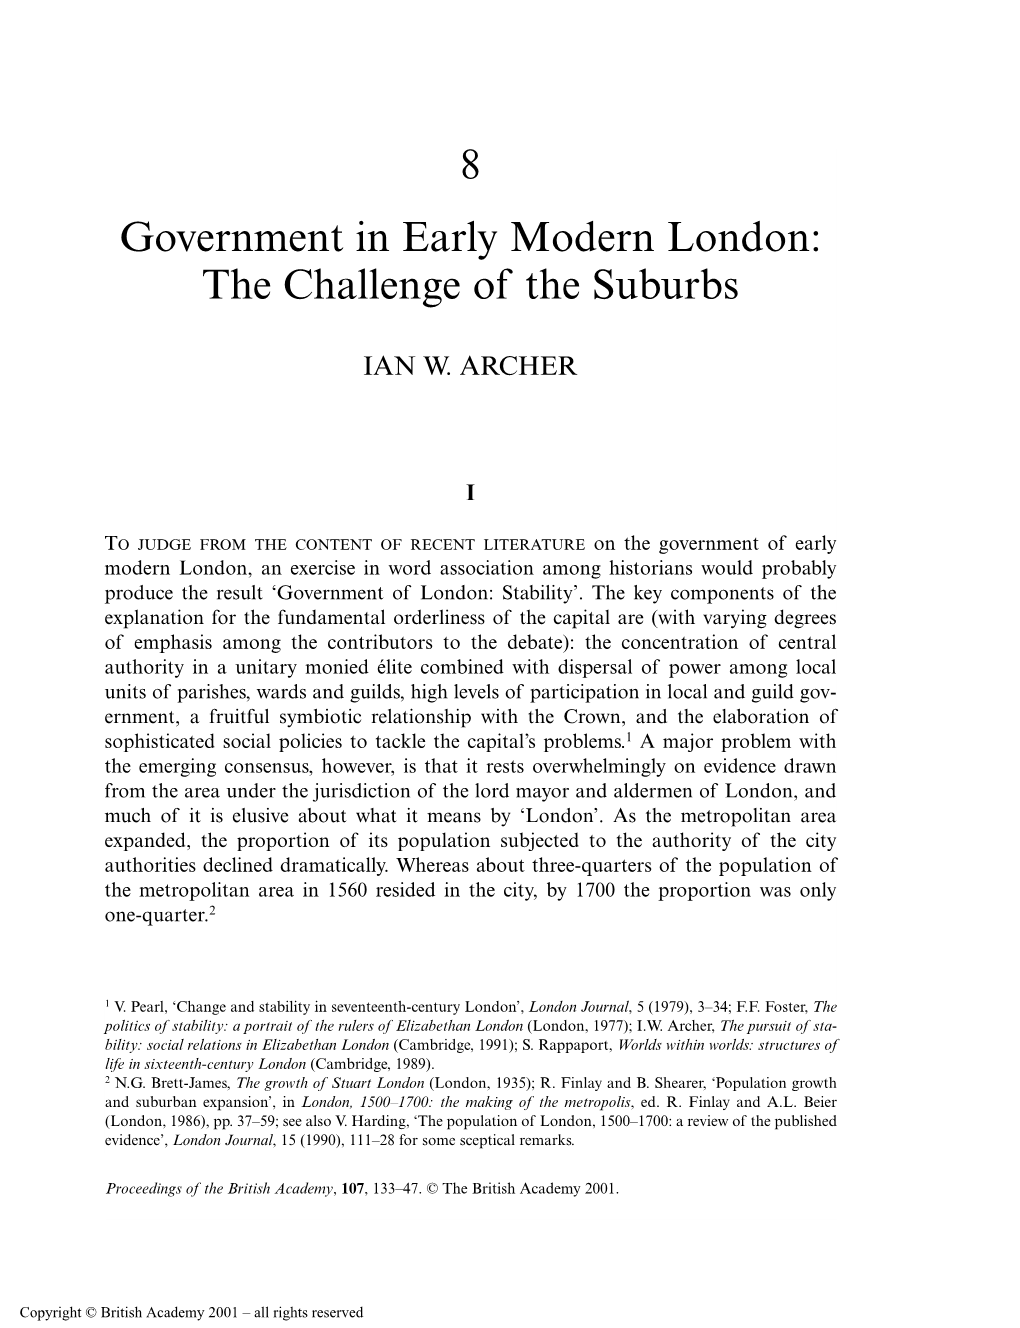 8 Government in Early Modern London: the Challenge of the Suburbs